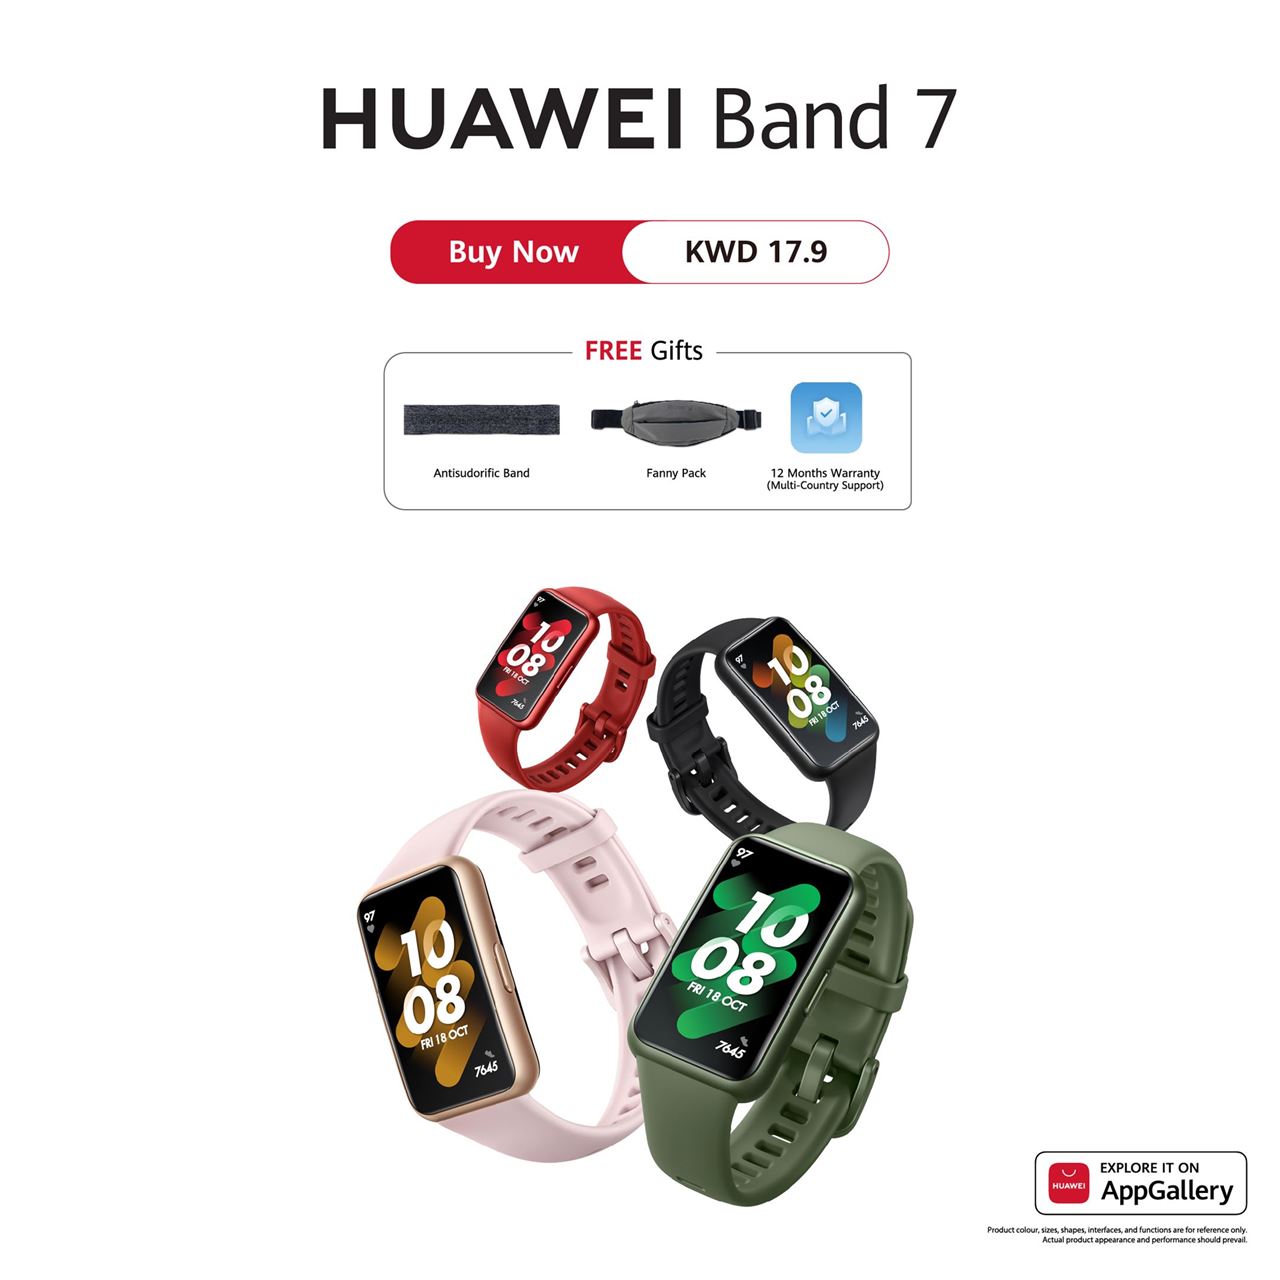 The Ultra-Thin FullView Smart Band with a Long Battery Life HUAWEI Band 7 launches in Kuwait